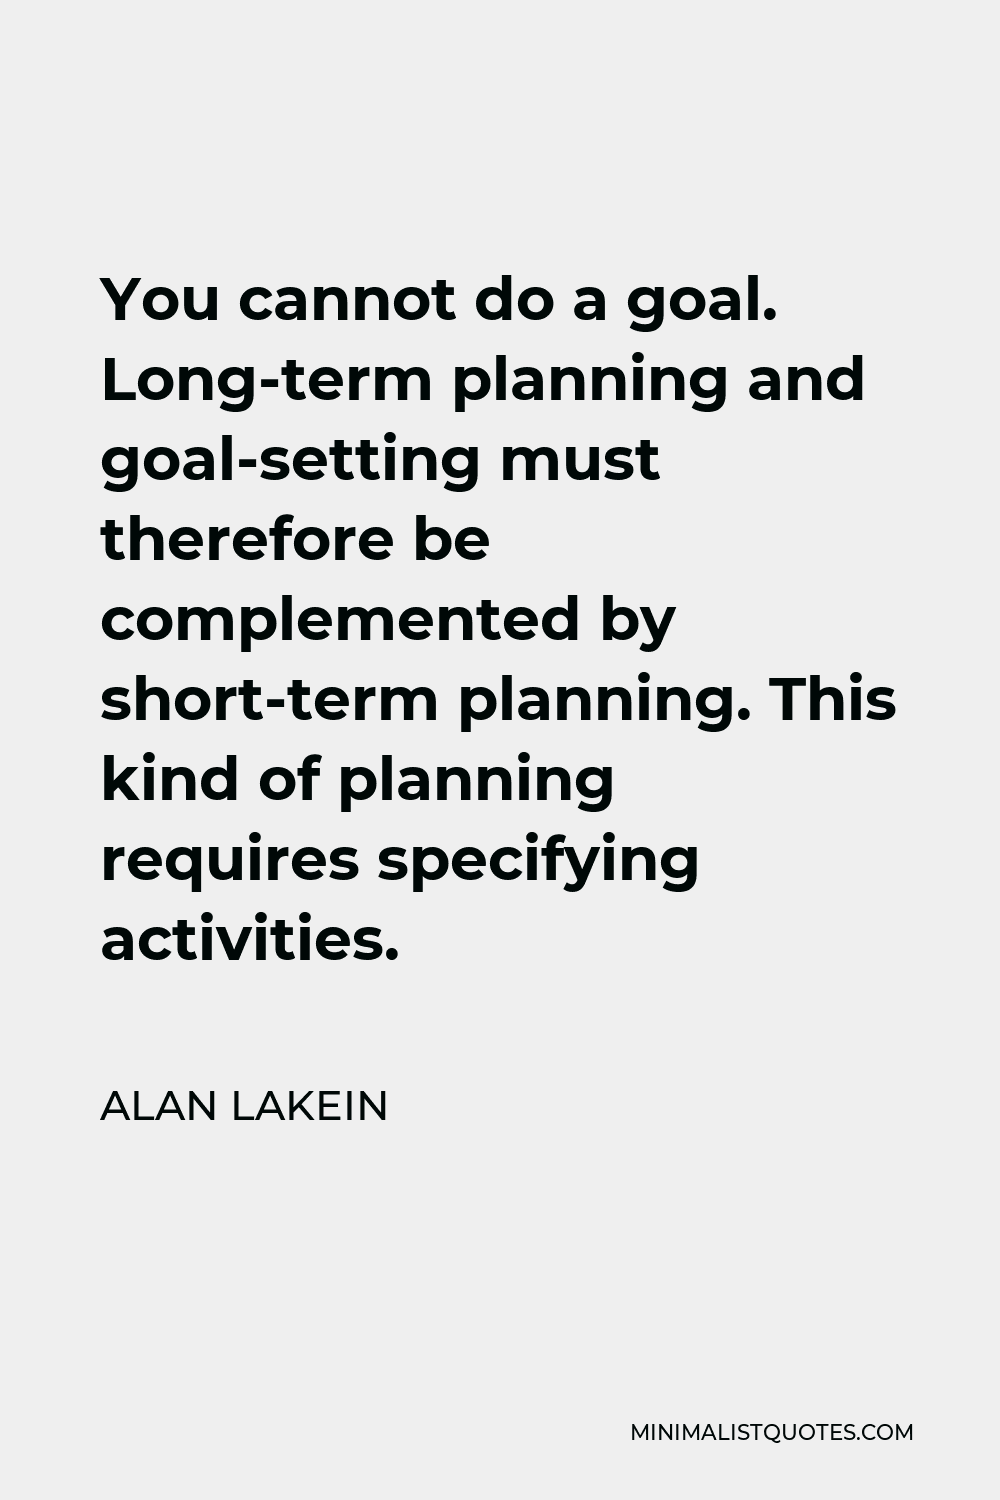 Alan Lakein Quote - You cannot do a goal. Long-term planning and goal-setting must therefore be complemented by short-term planning. This kind of planning requires specifying activities.